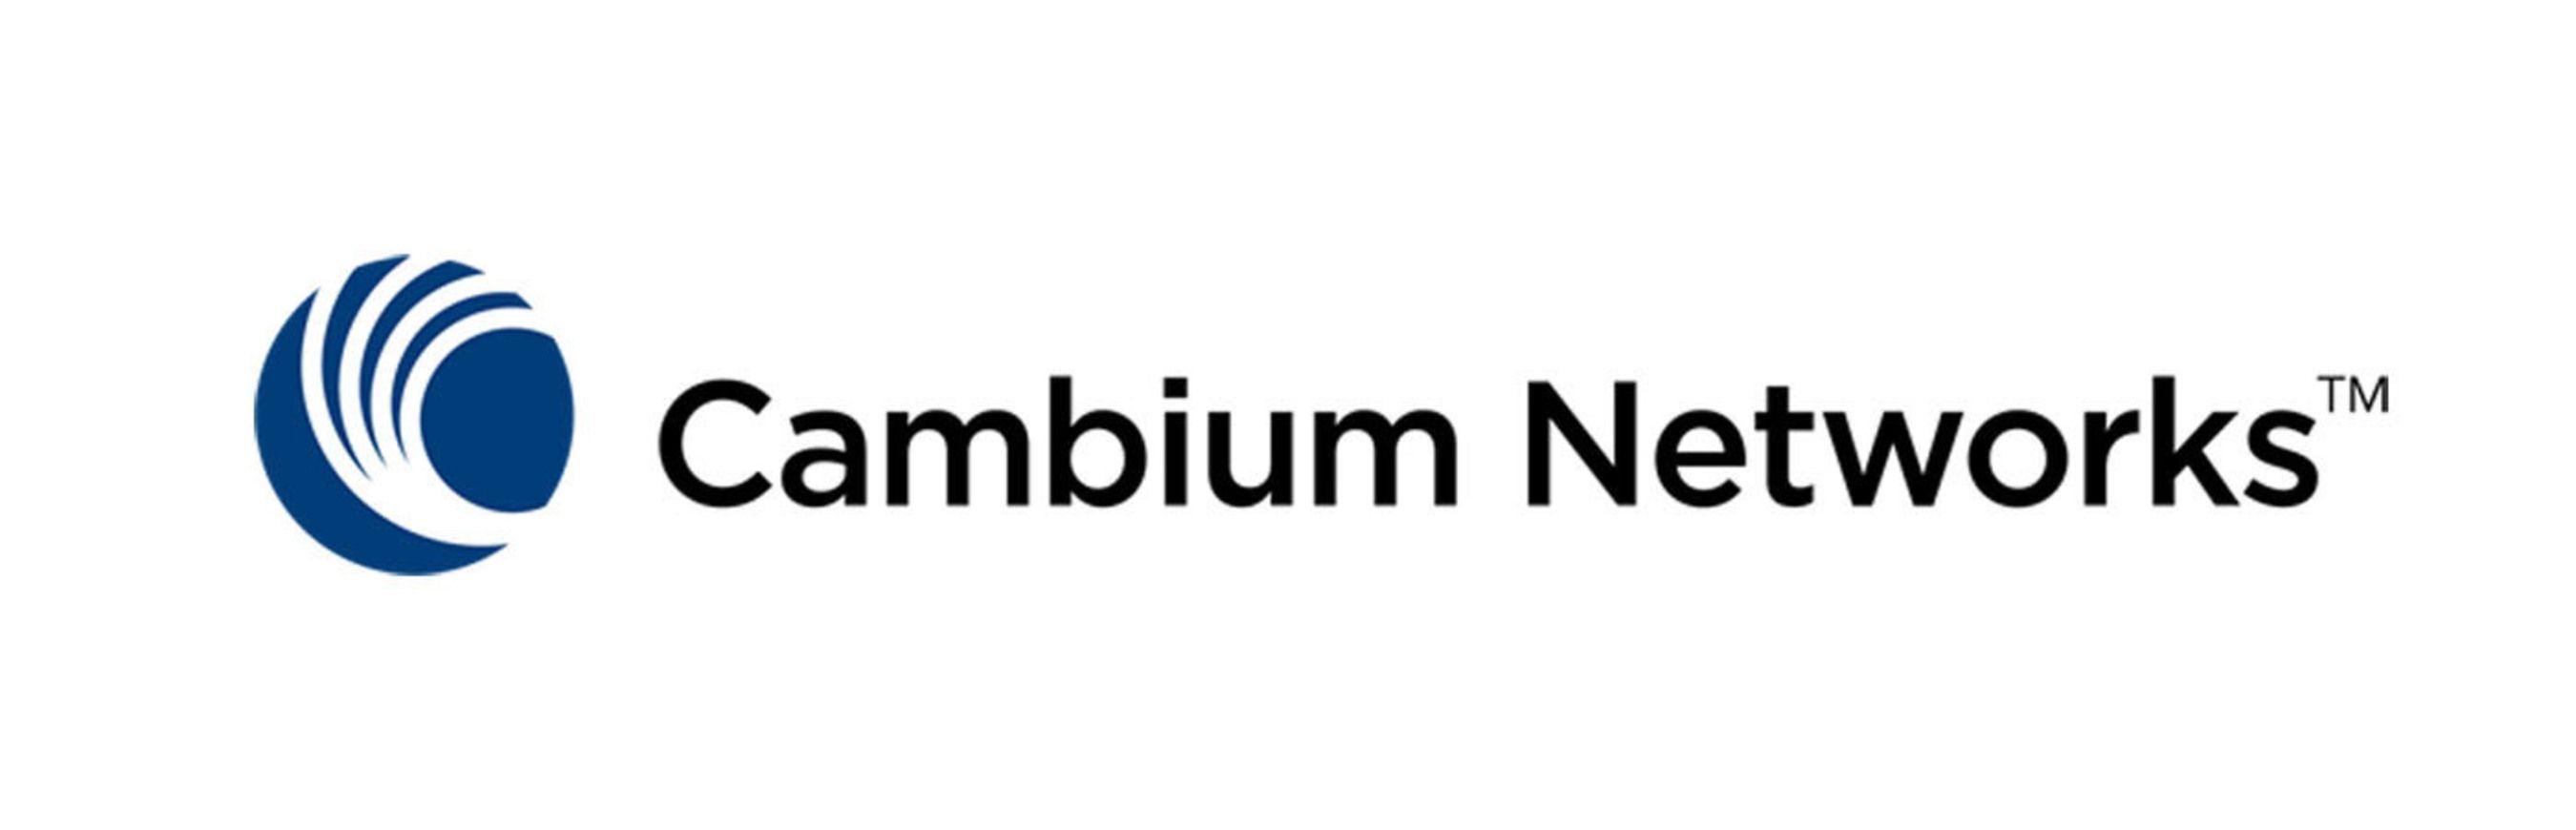 Wireless Network Logo - Cambium Networks And Frontier Communications Deploy Wireless Network ...